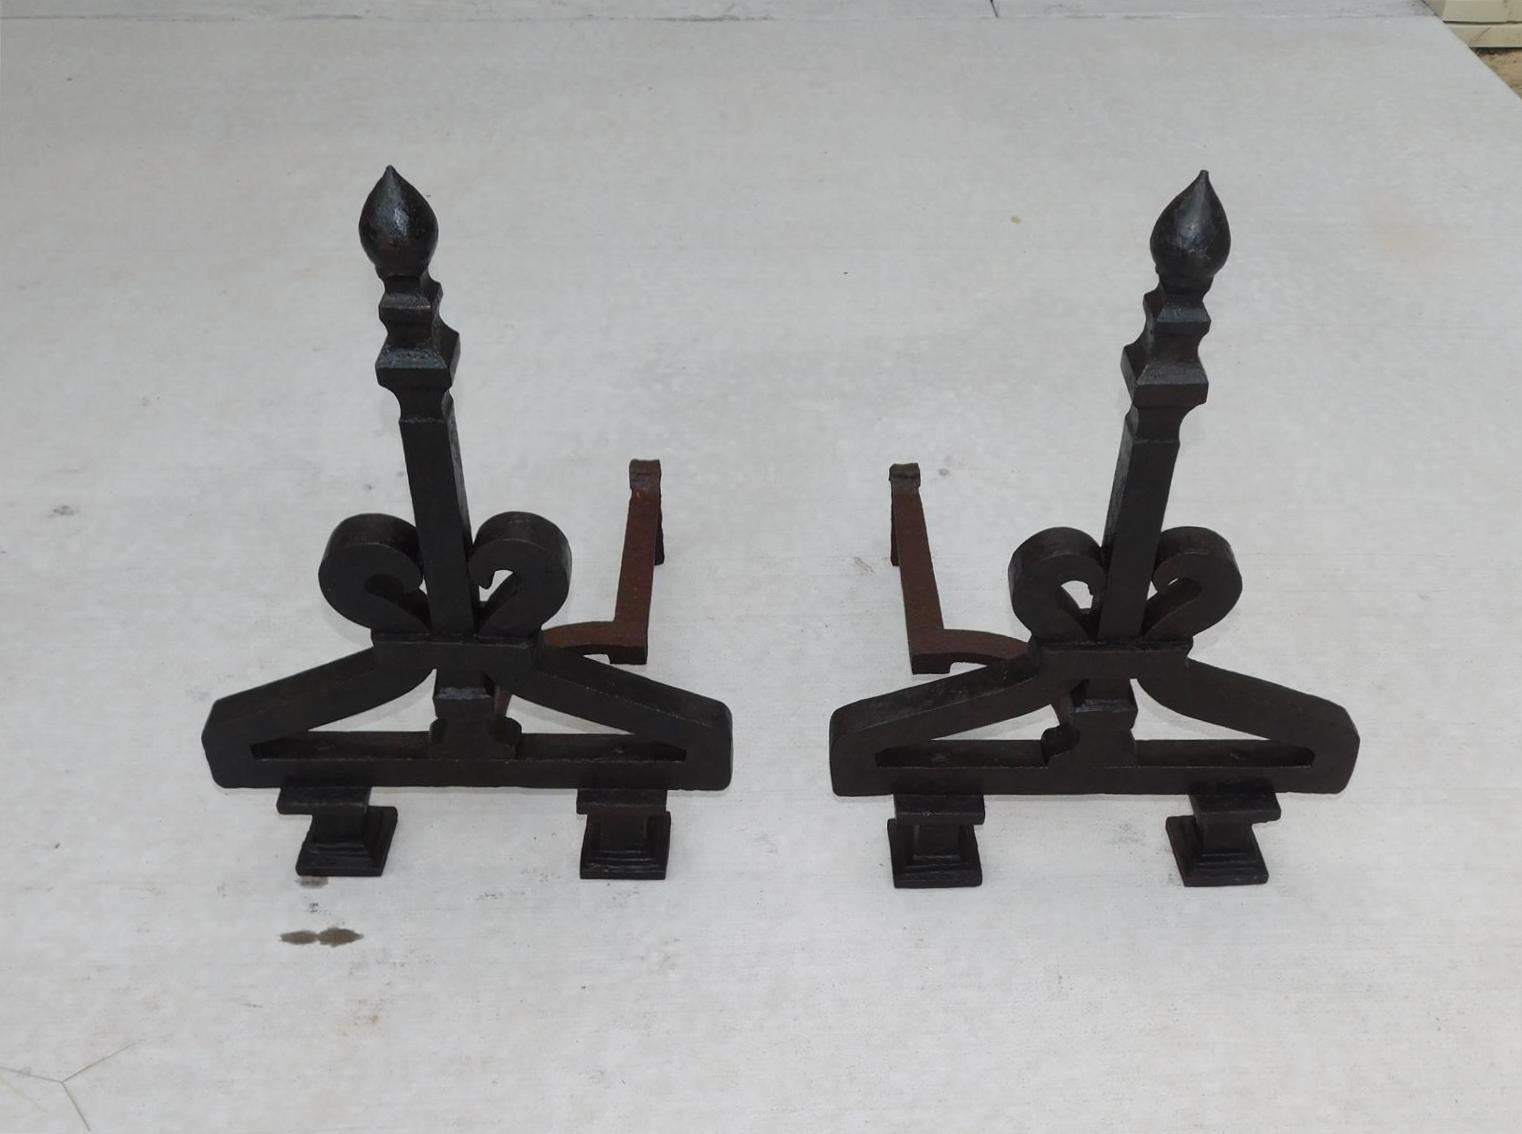 American wrought iron faceted lemon finial andirons with central squared tapered columns, flanking scrolled banded plinths, curvature dog legs, and resting on double column block feet. Early 19th Century